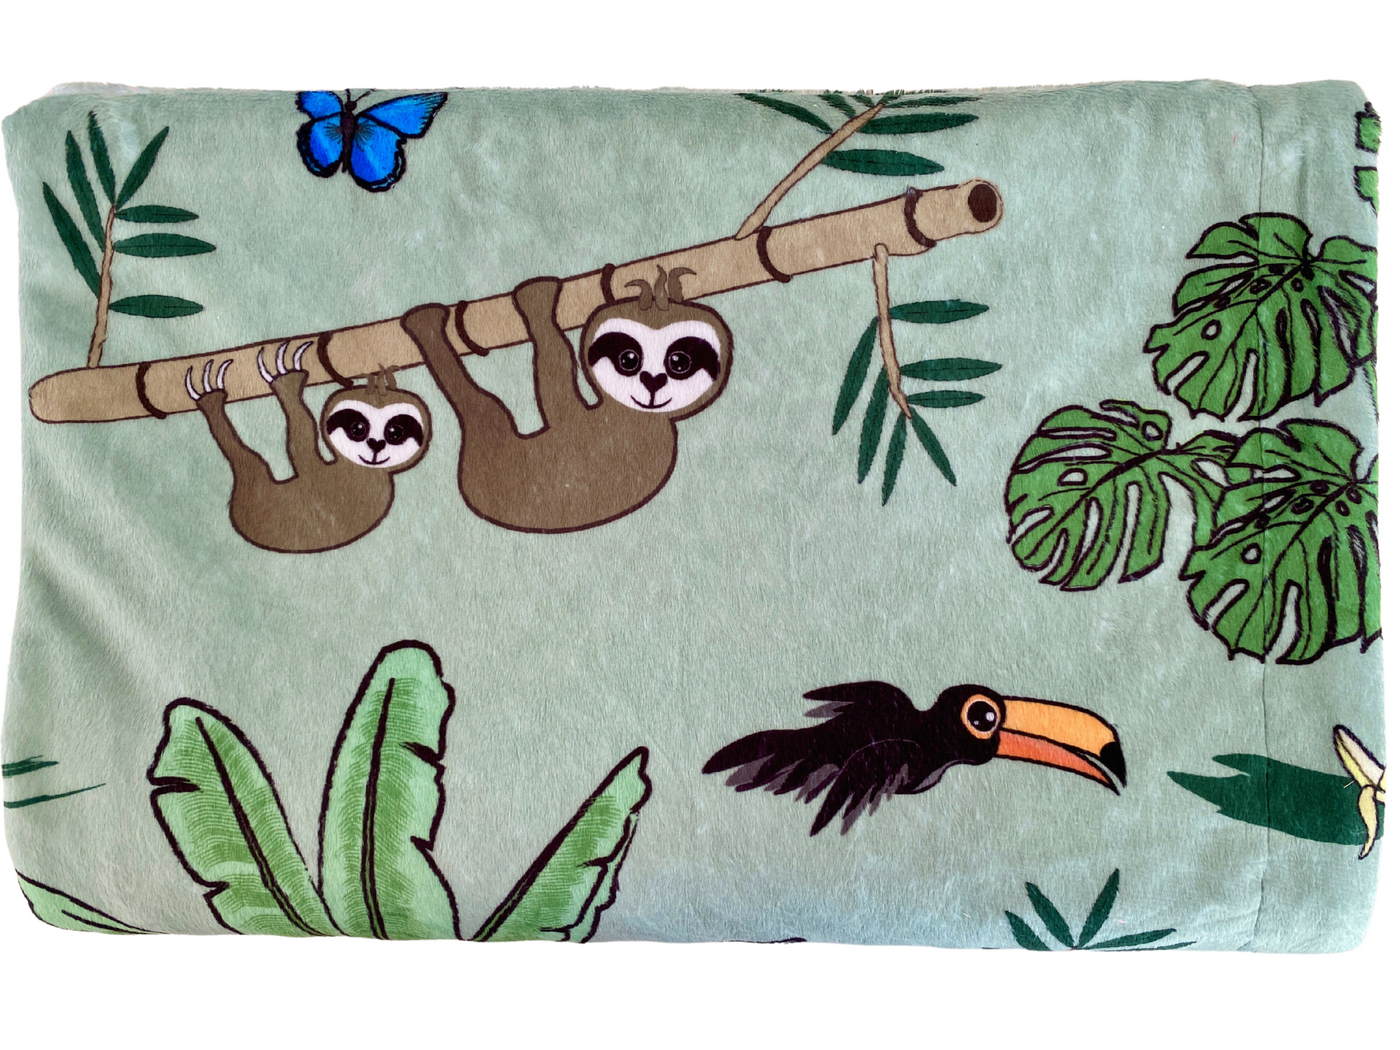 Baby blanket: Sloths in the Jungle